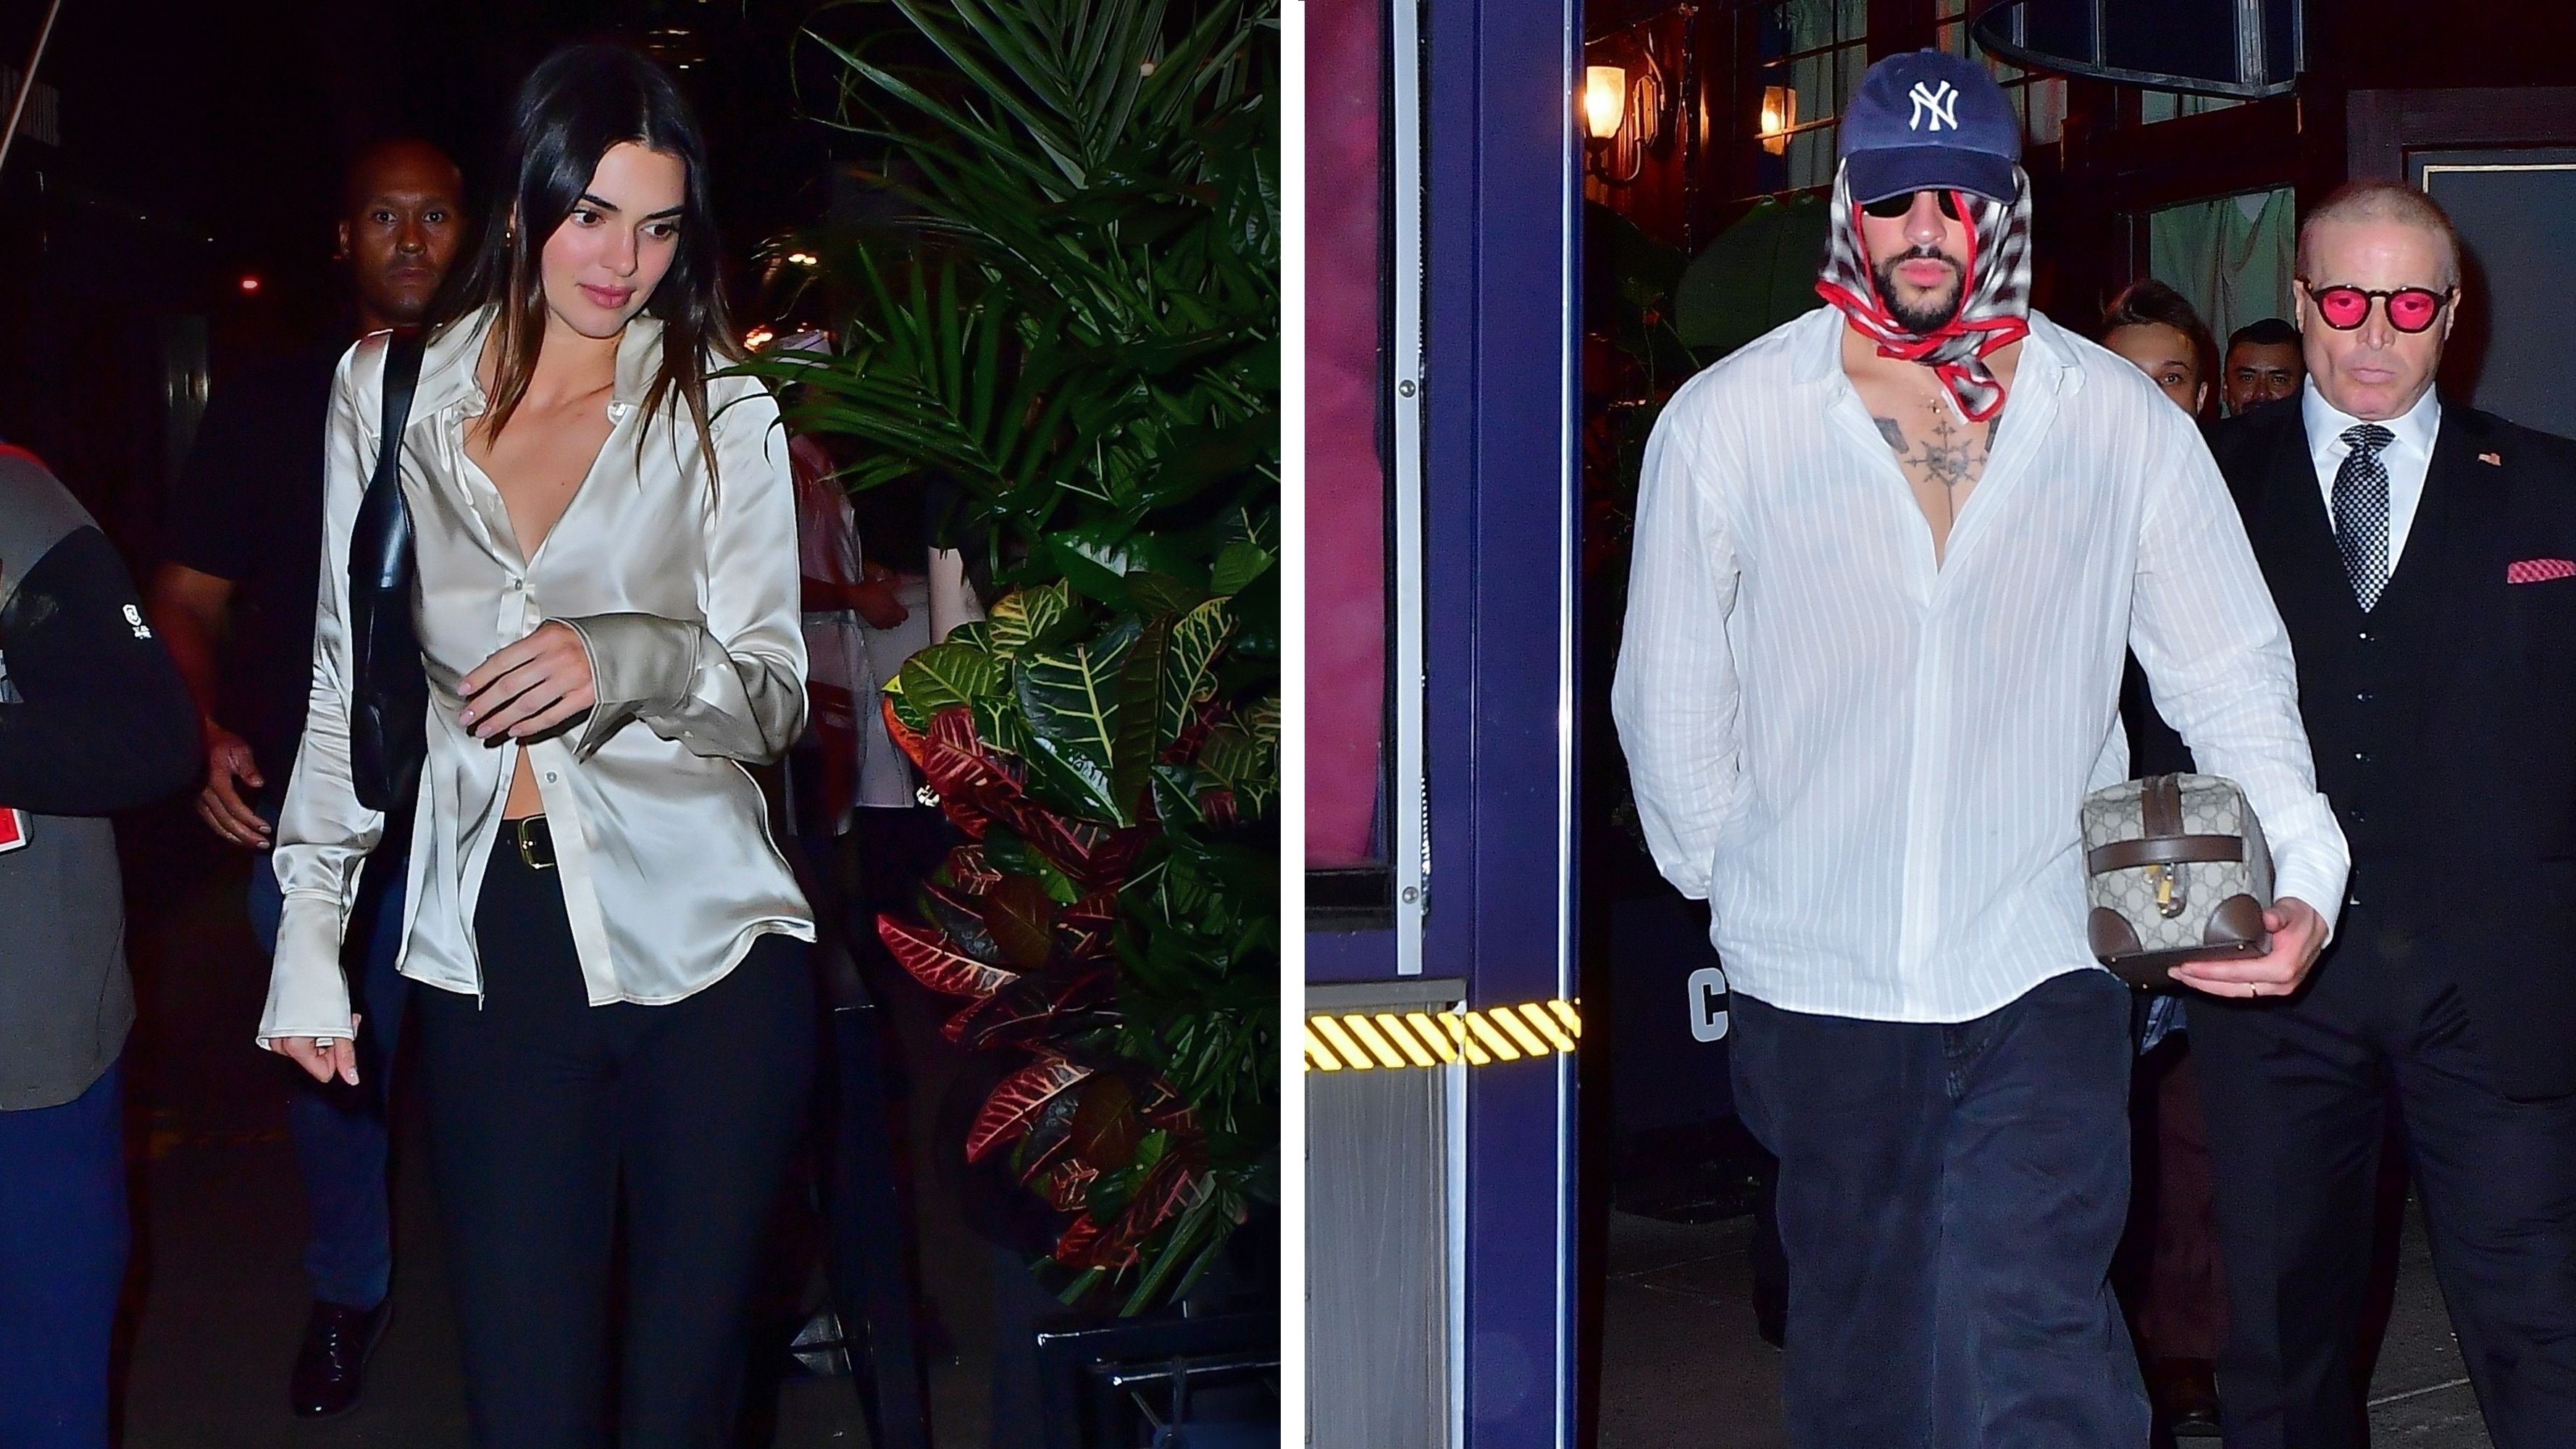 Kendall Jenner and boyfriend Bad Bunny seen on romantic date night